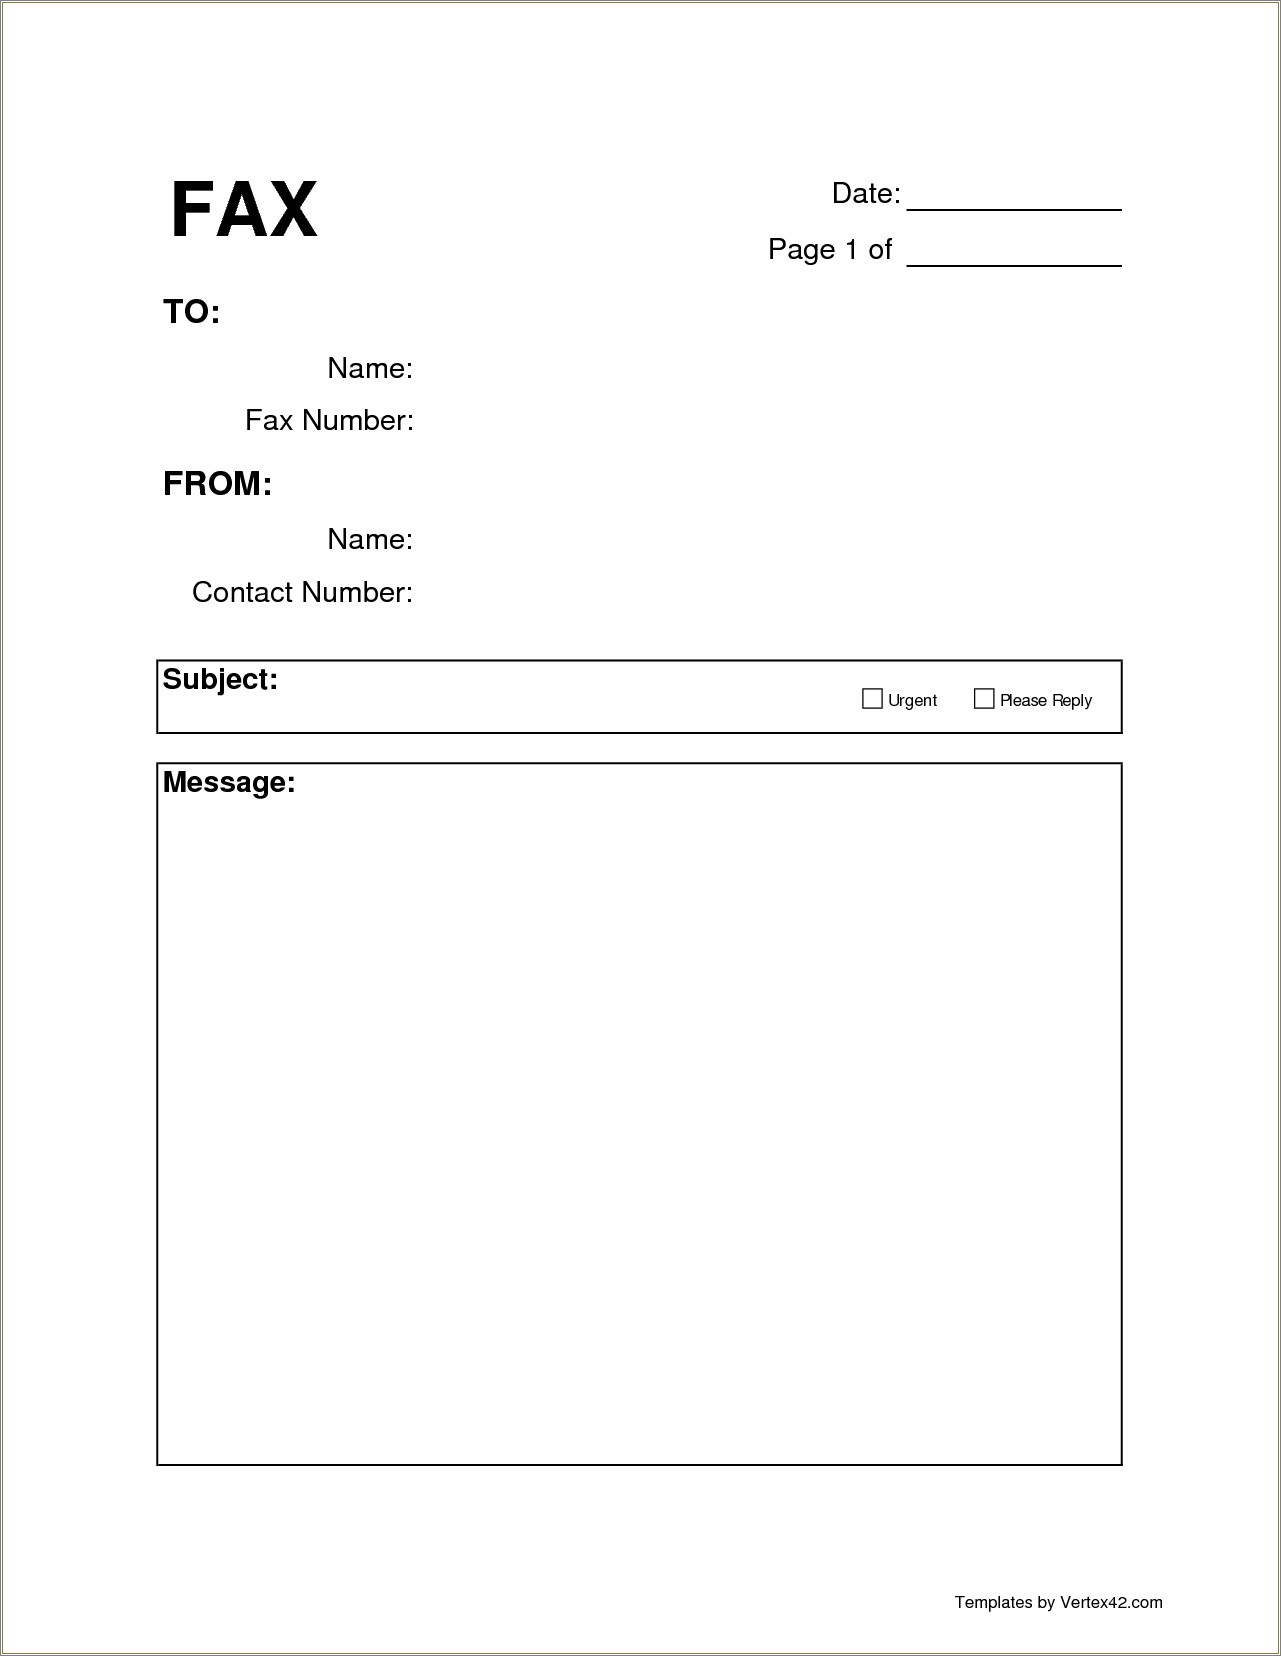 Free Fax Cover Sheet Template For Ipad